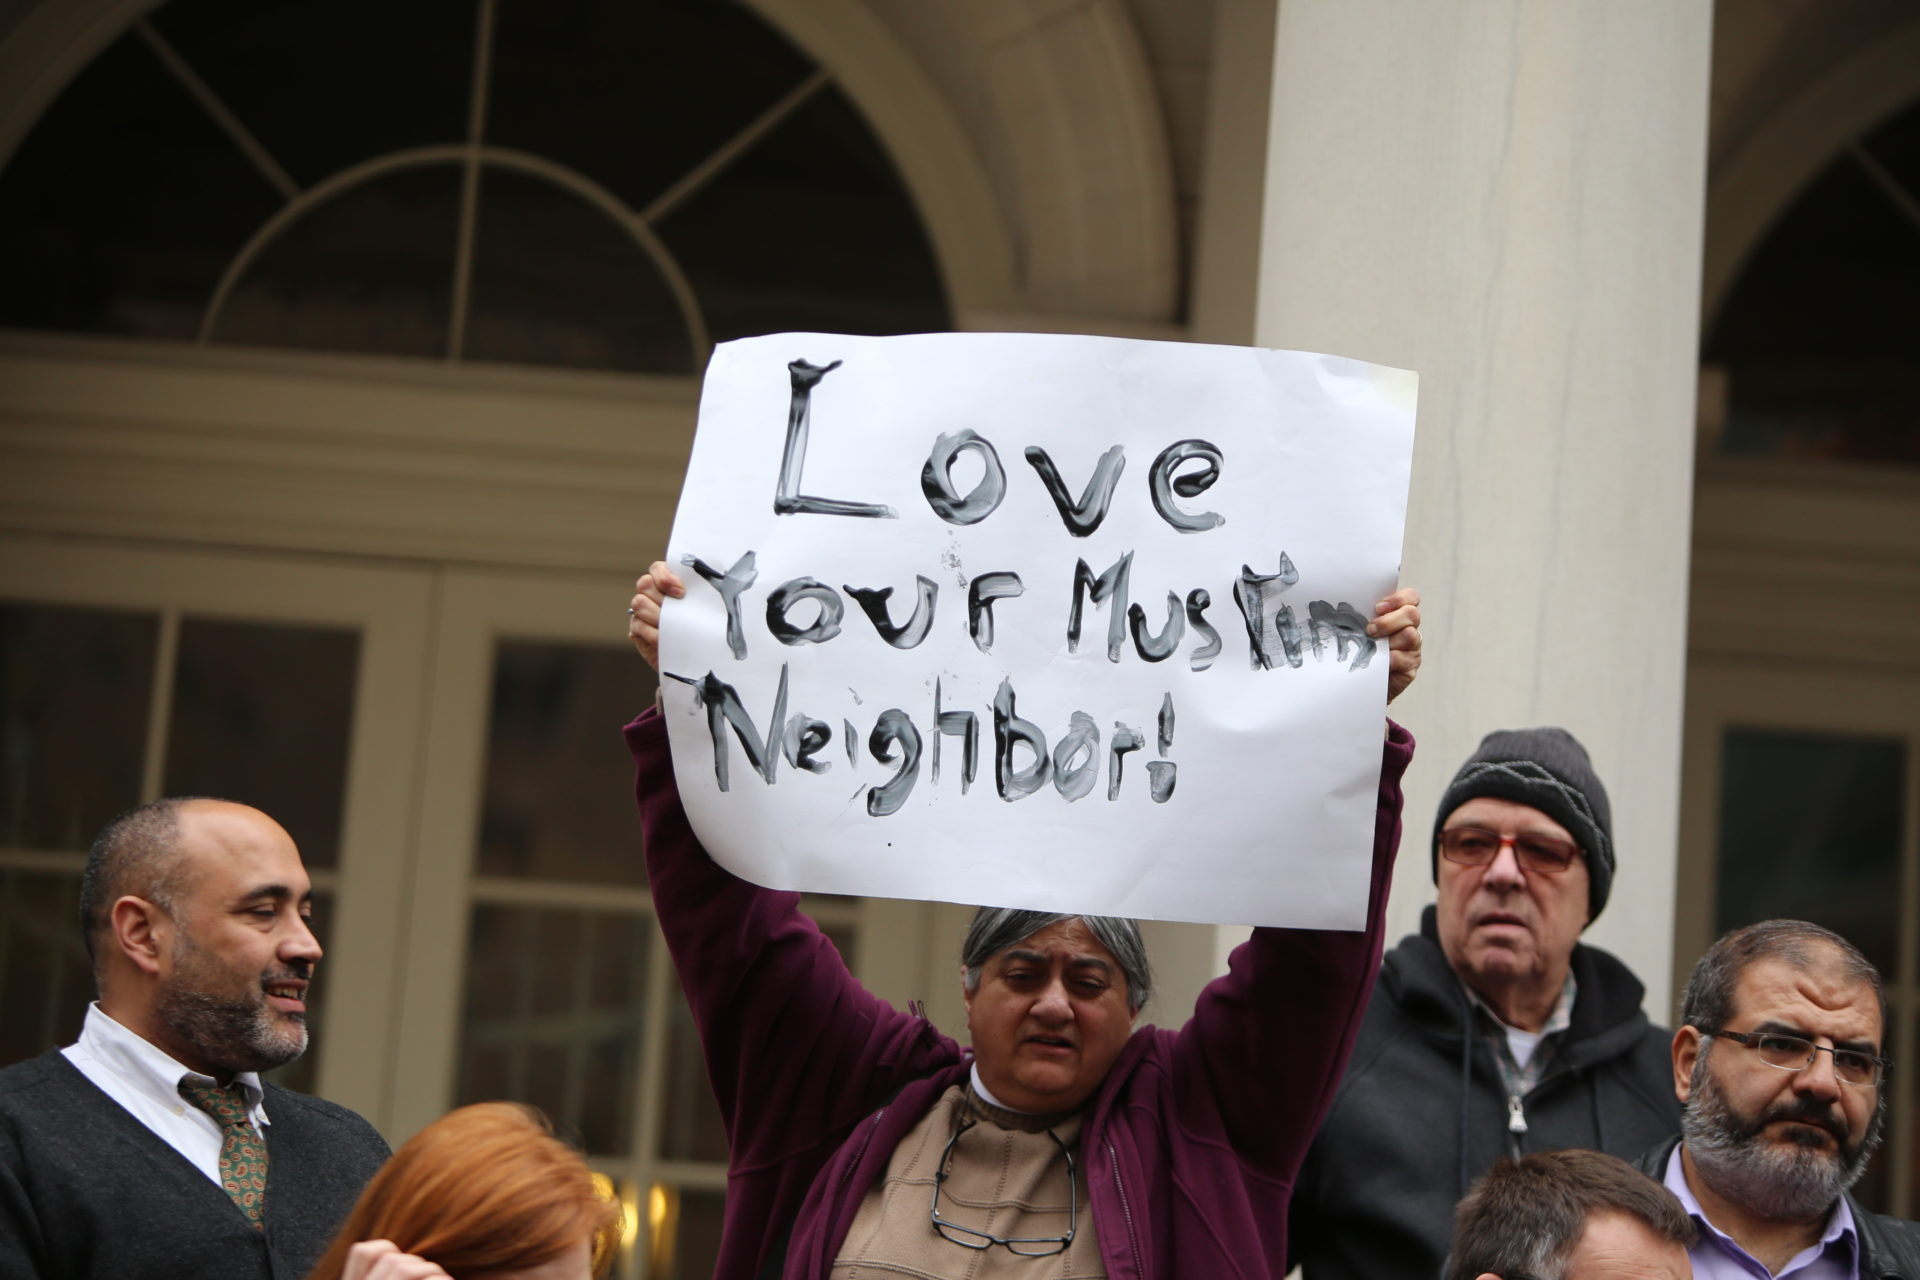 Hundreds Show Up to Show Support for Muslims in “Stand by our Muslim Neighbors” Event in Tulsa